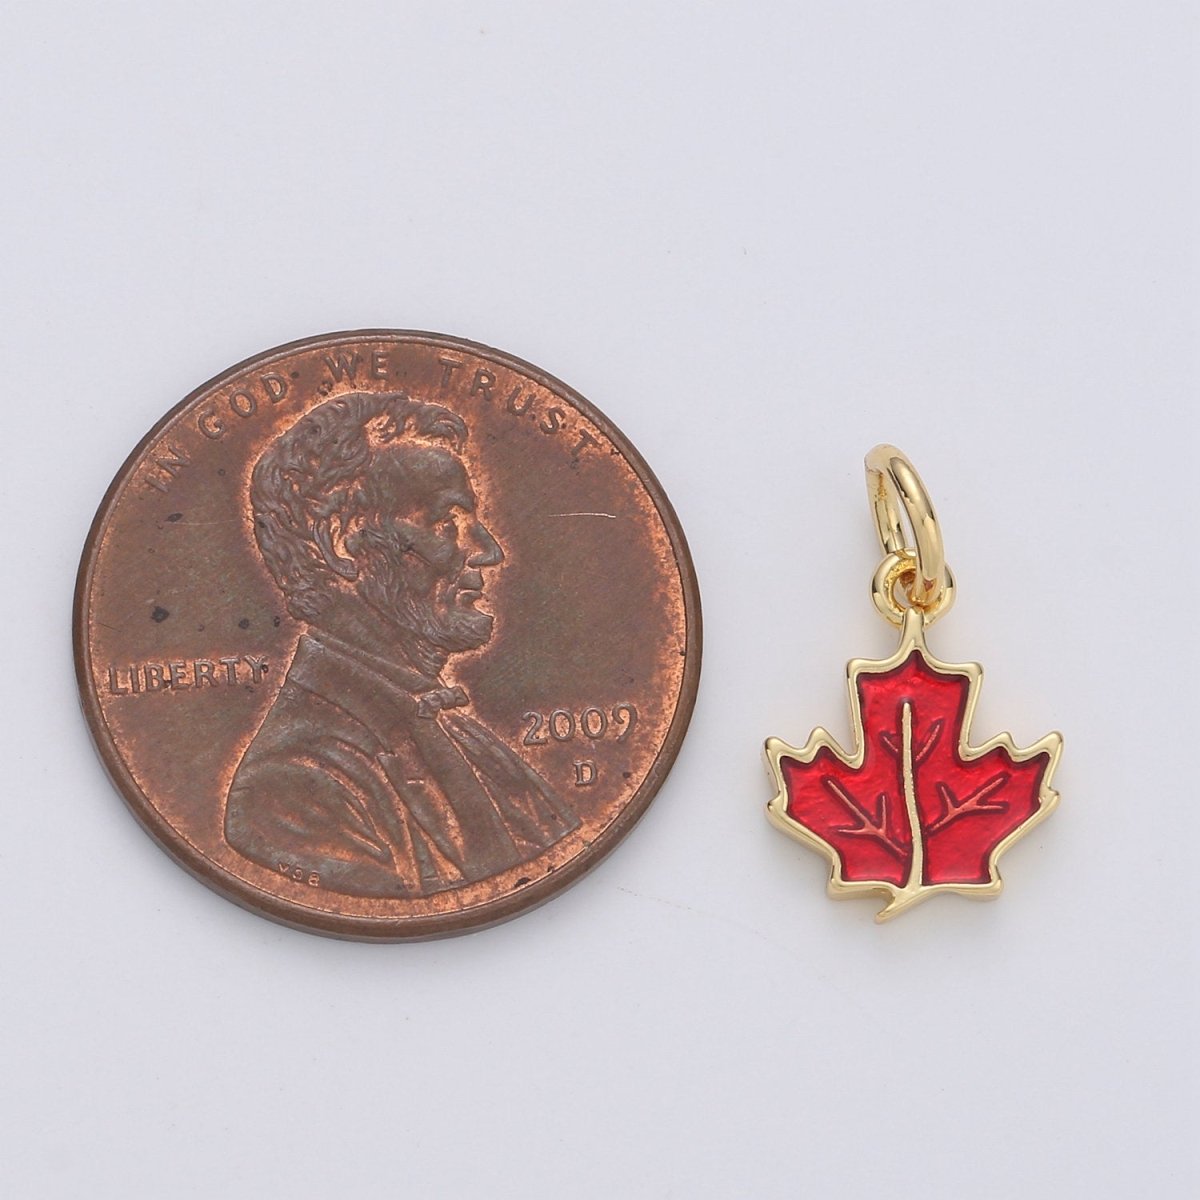 Dainty Red Maple Pendant Enamel Maple Tree Charm, Gold Canada Charm Jewelry for Necklace Bracelet Earring Component D-190 D-191 - DLUXCA